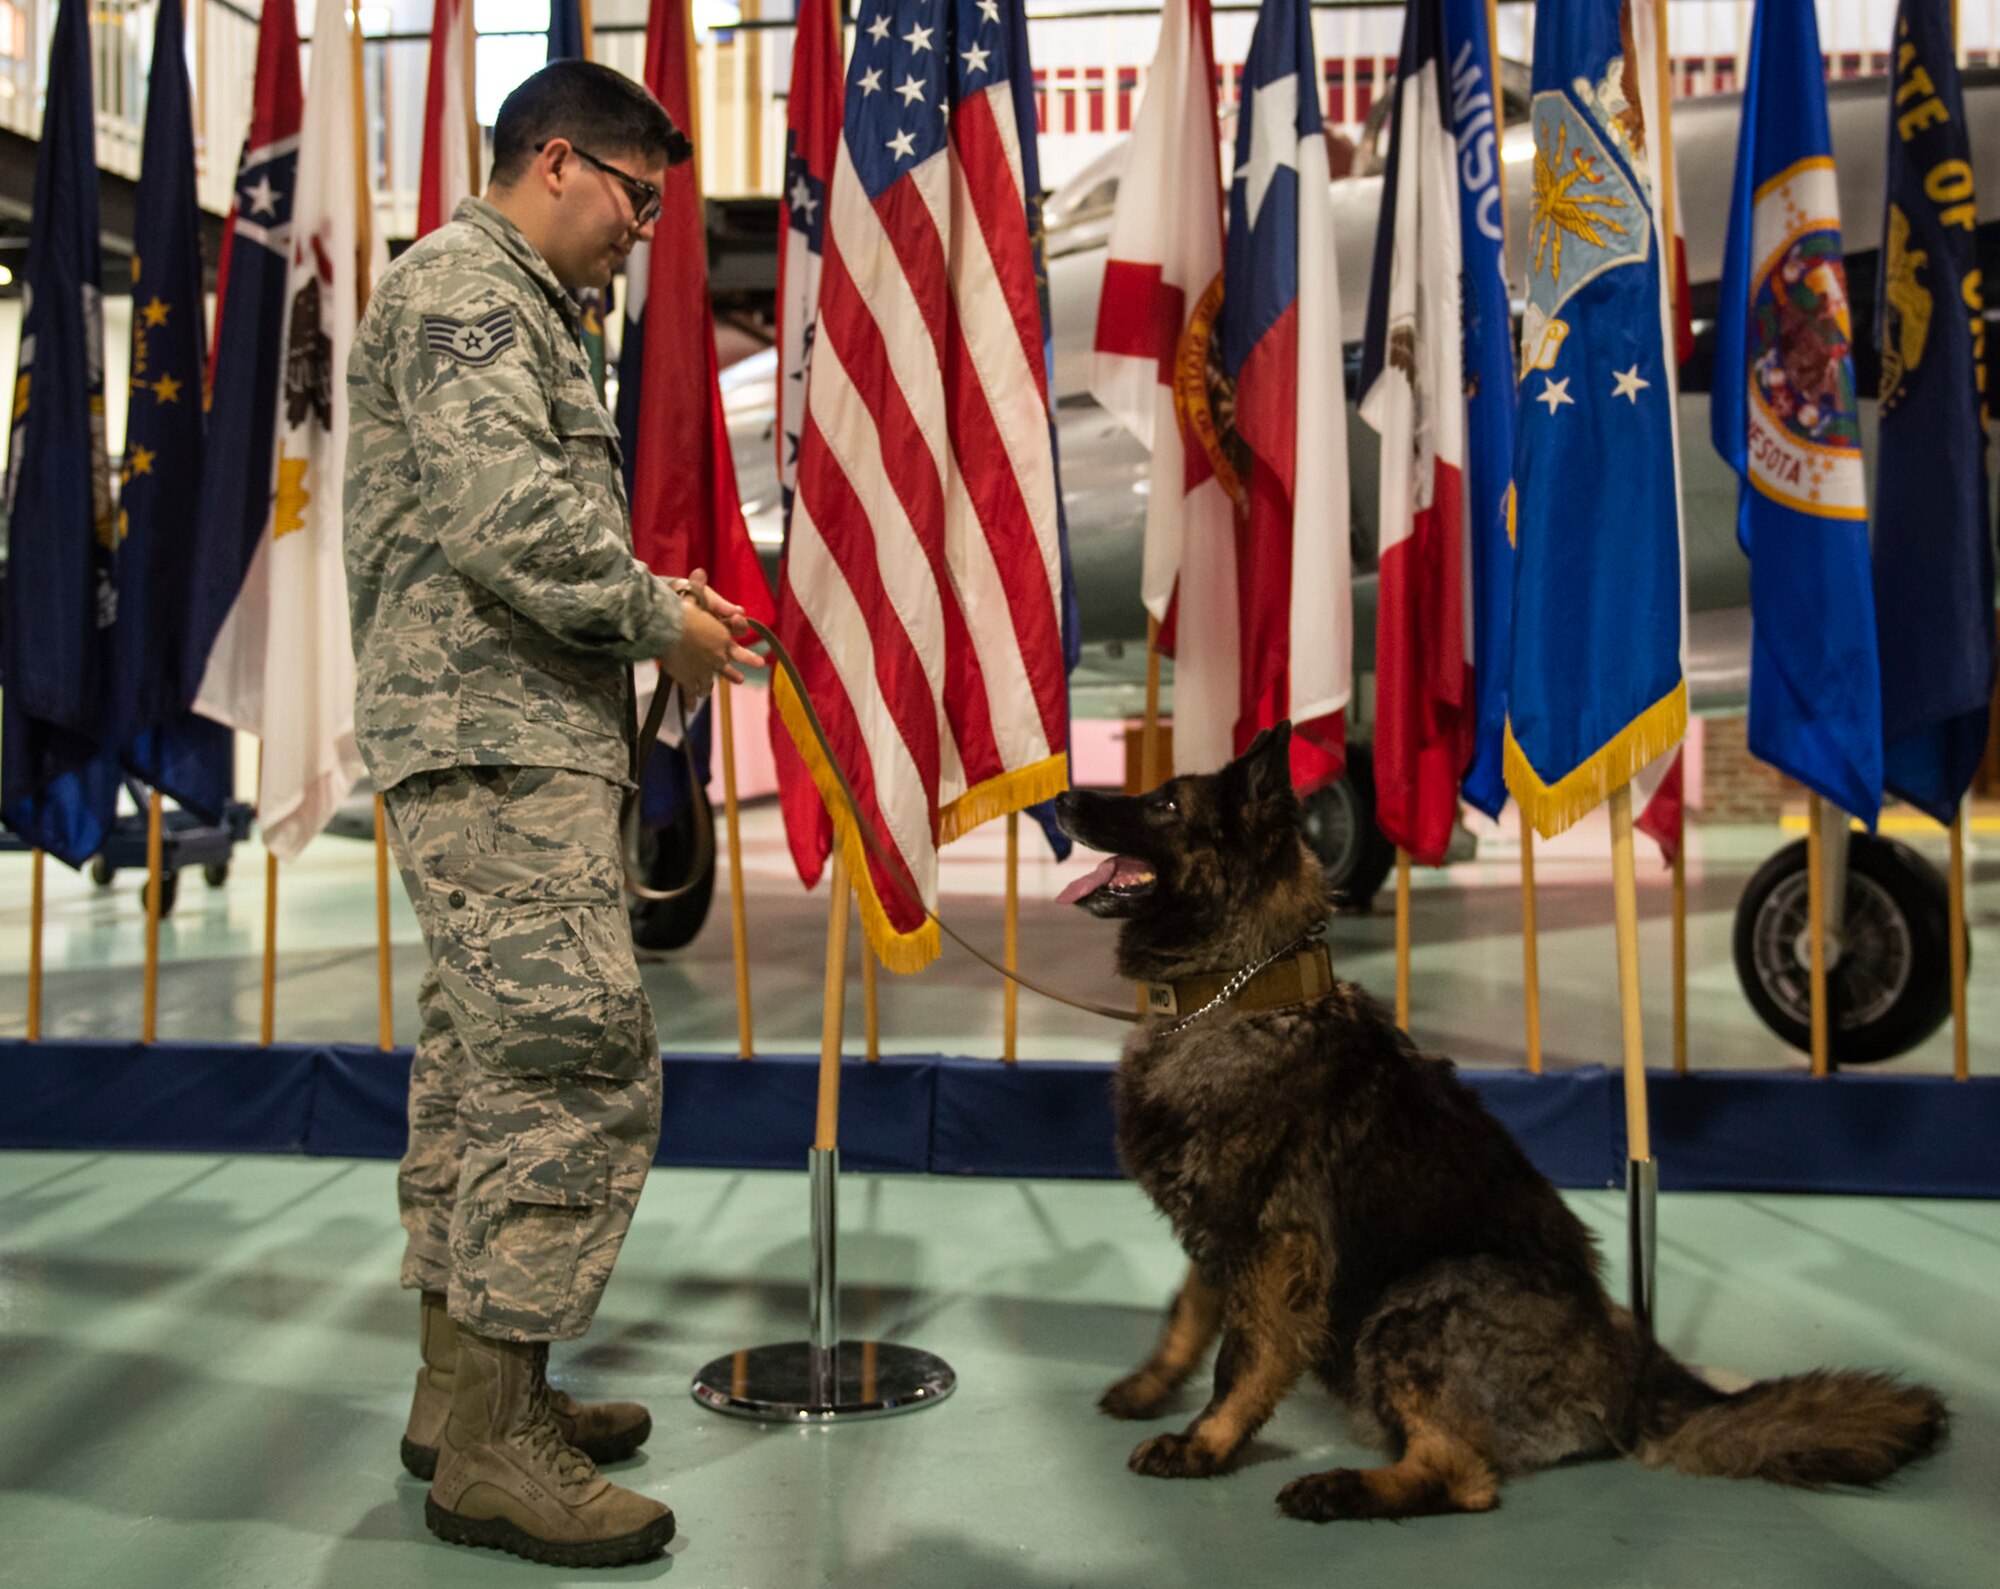 96th Security Forces Squadron holds a retirement ceremony to honor Military Working Dogs, Roy and Zuzu at the Air Force Armament Museum.